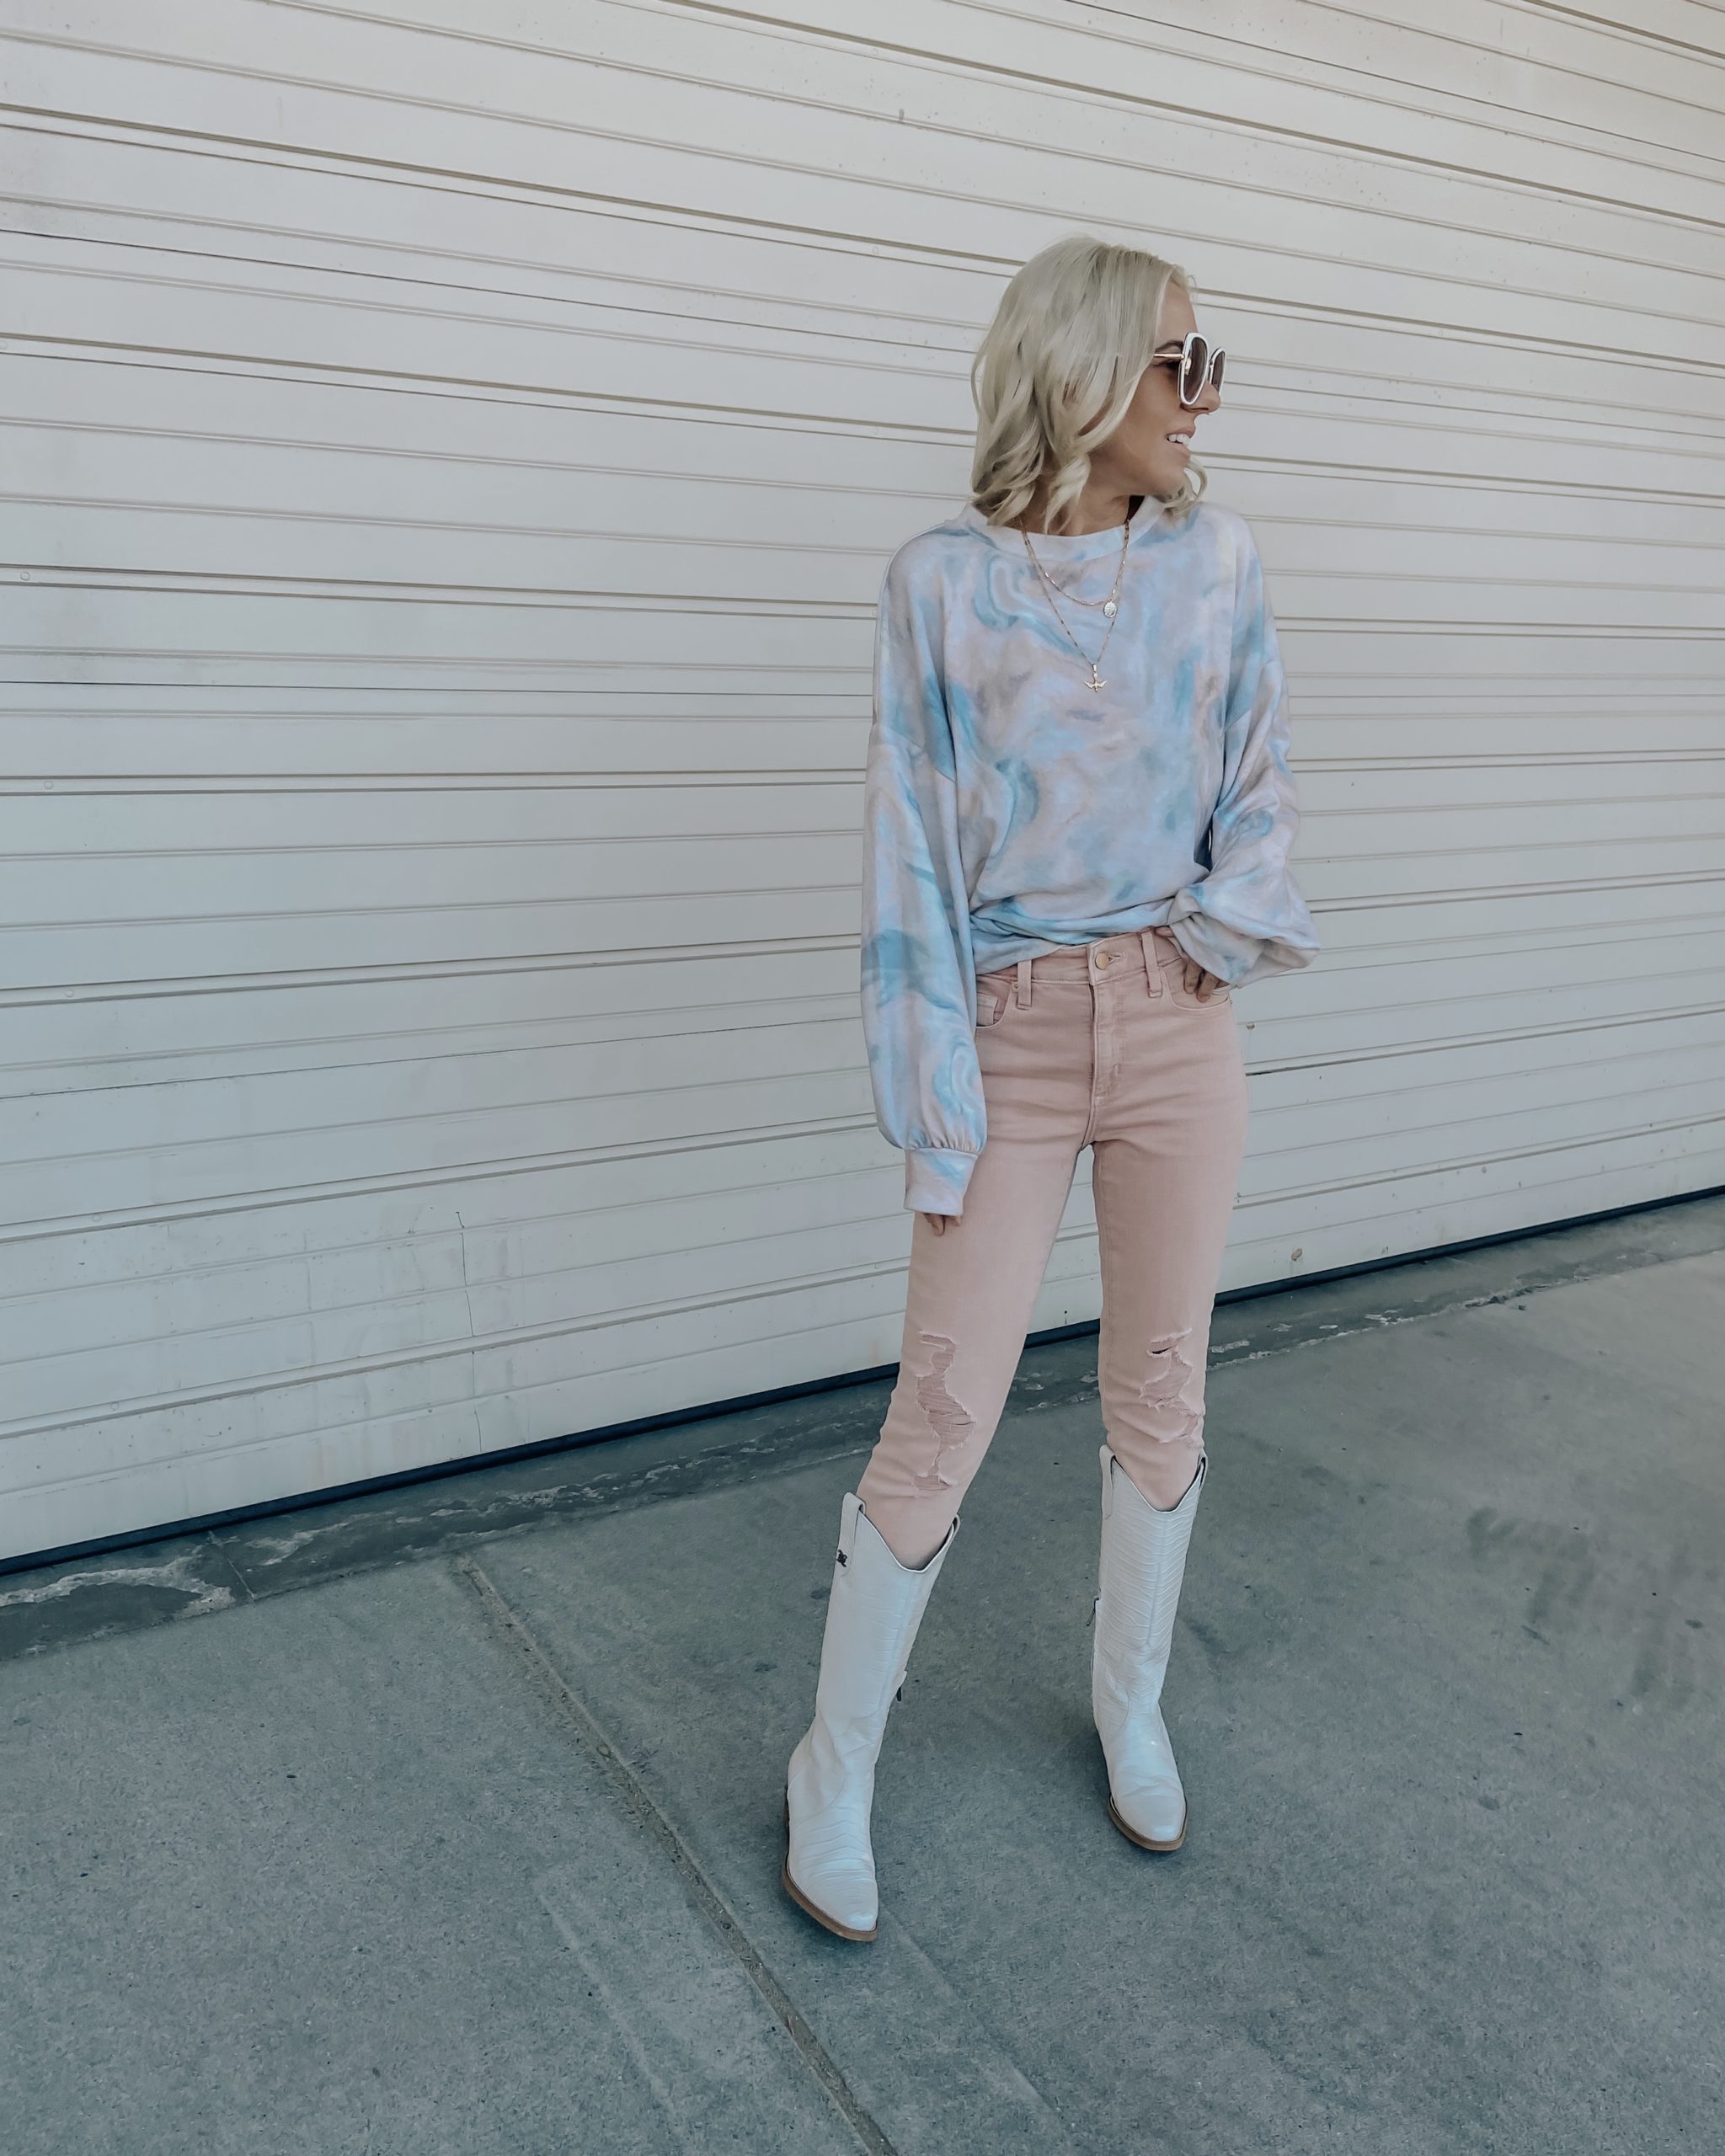 SPRING TREND ALERT: PASTELS- Jaclyn De Leon Style + the new color palette for spring is pastels and I couldn't be more excited about it. These pastel pink jeans are a new favorite and perfect for the season.